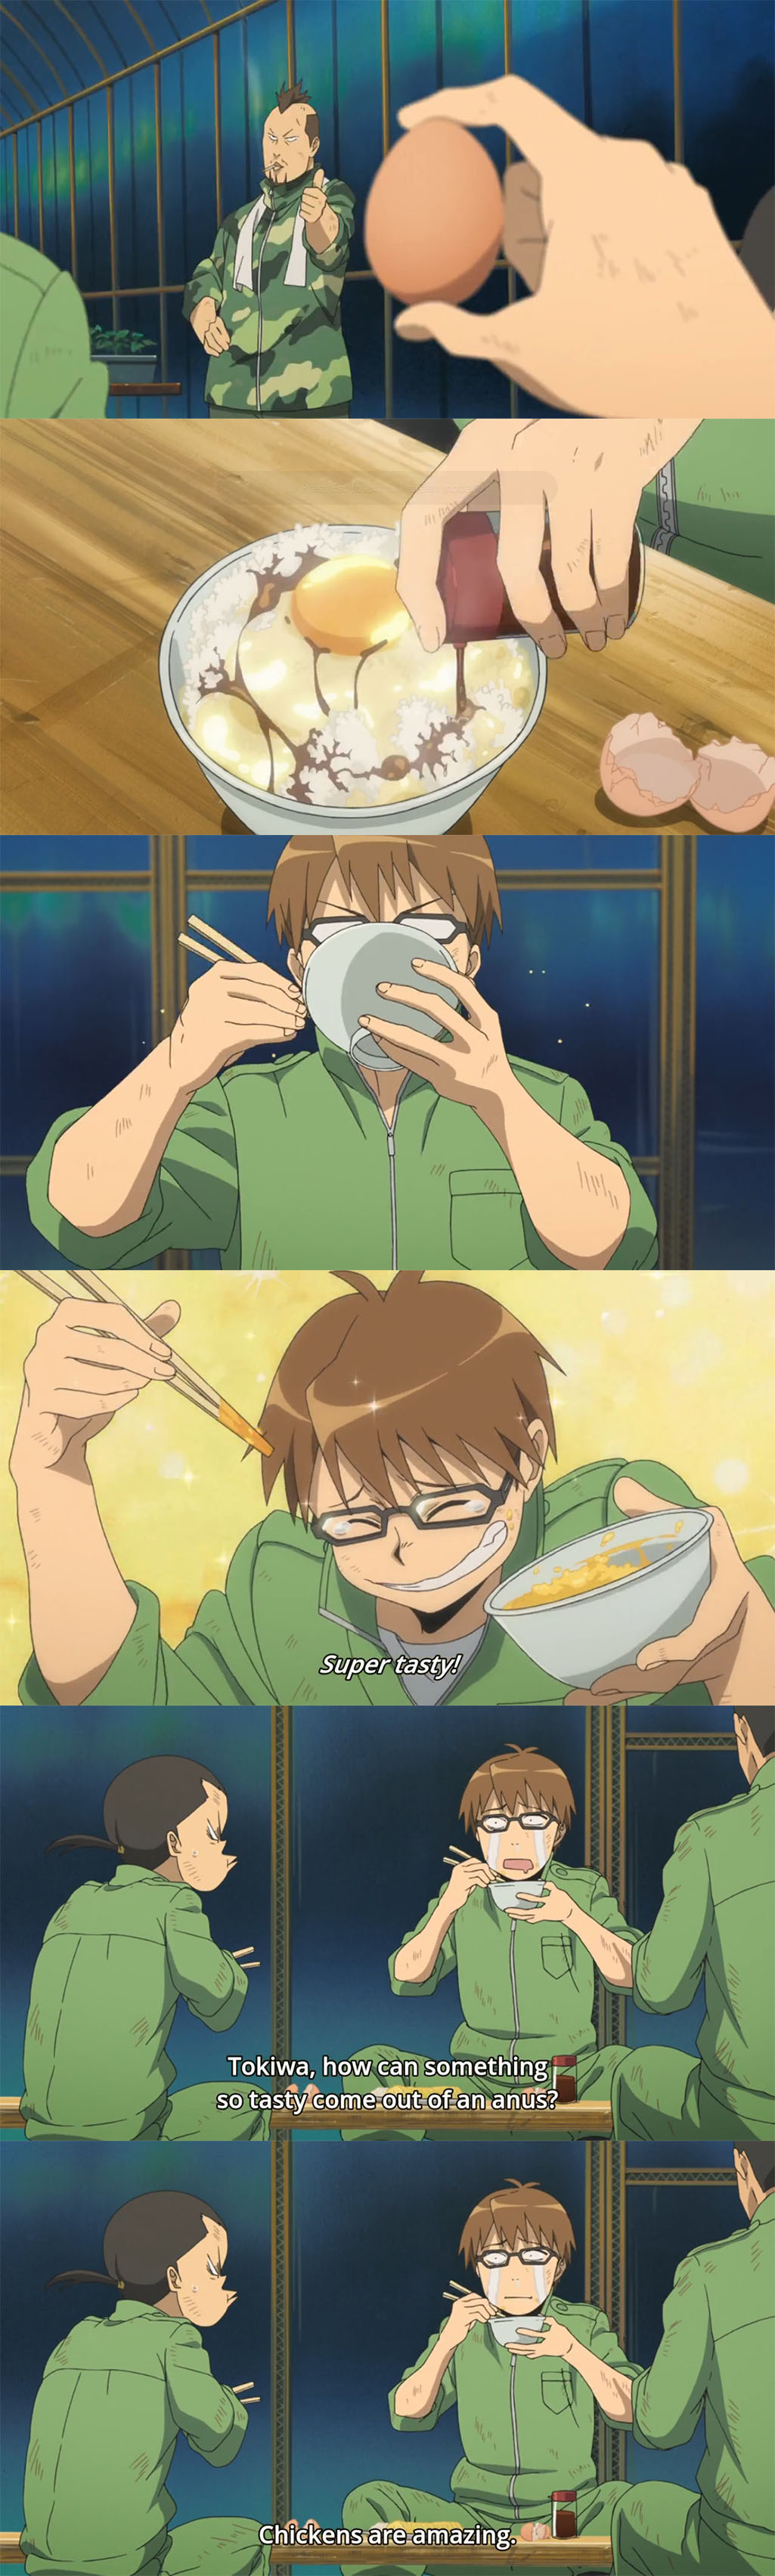 1 Egg in a cup ~Sauce: Gin No Saji ~